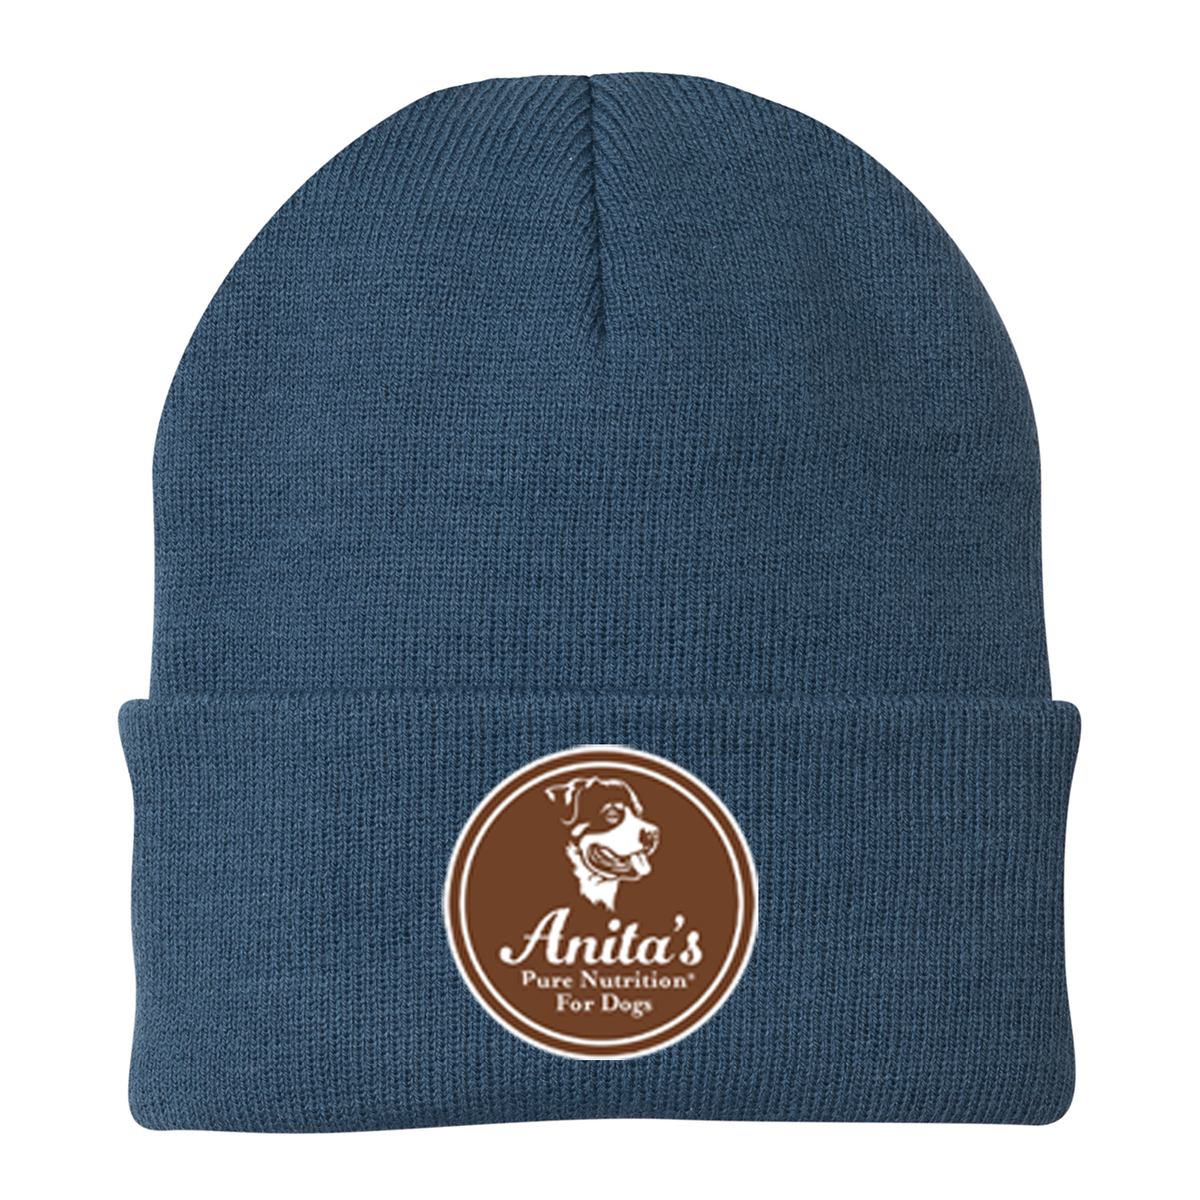 Anita's Pure Nutrition For Dogs Knit Beanie